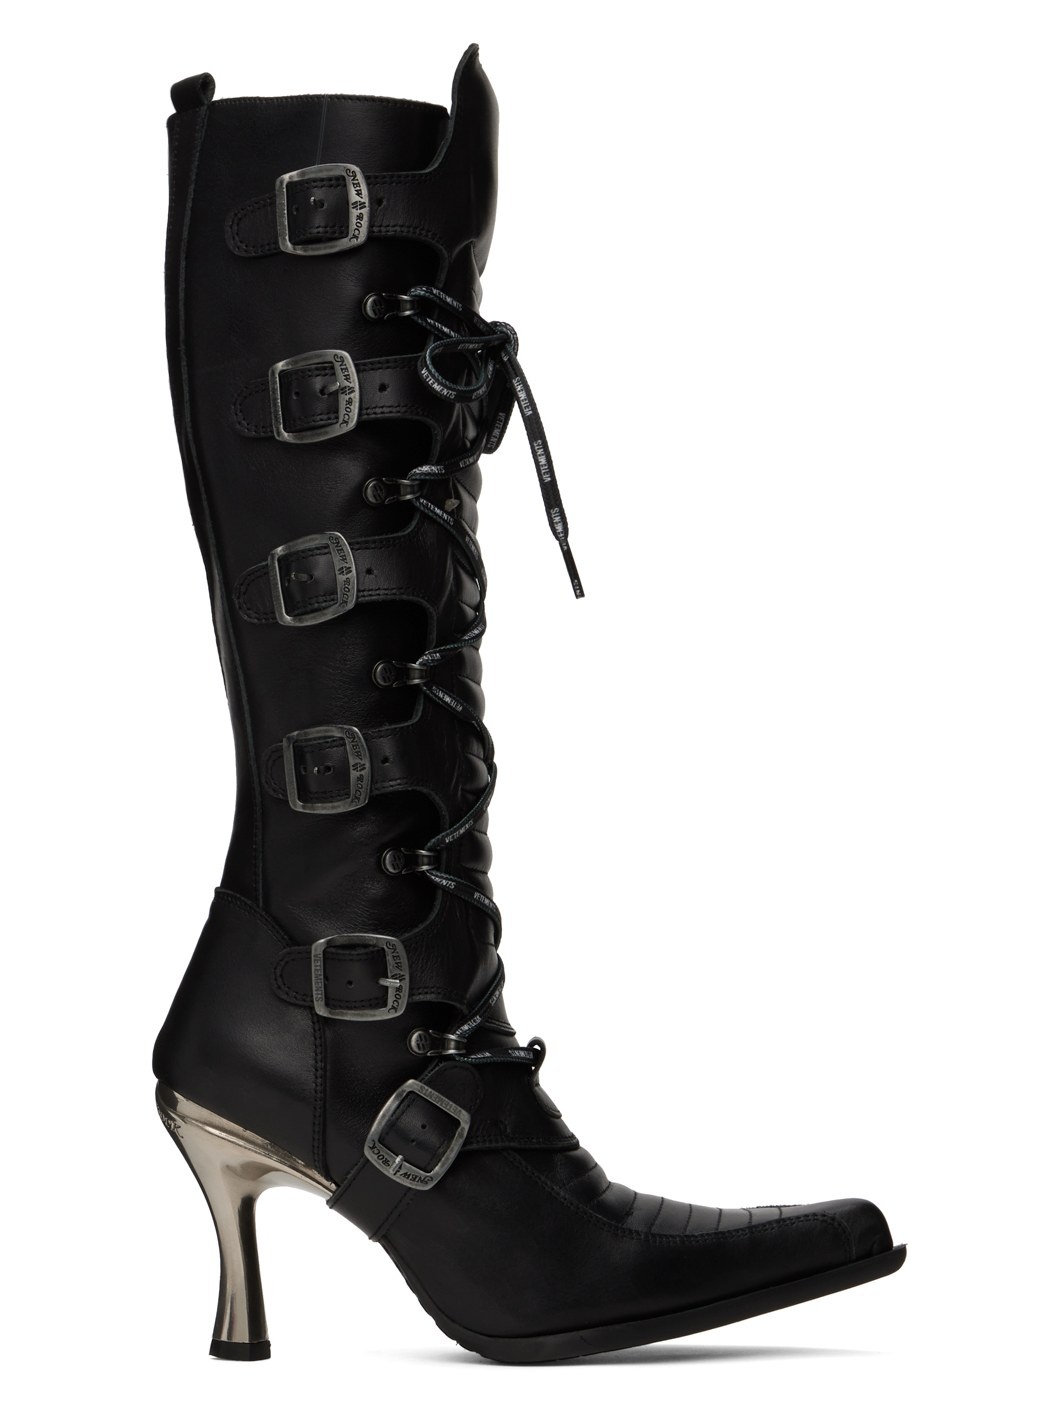 Black New Rock Edition Moto Lace-Up Boots - 1